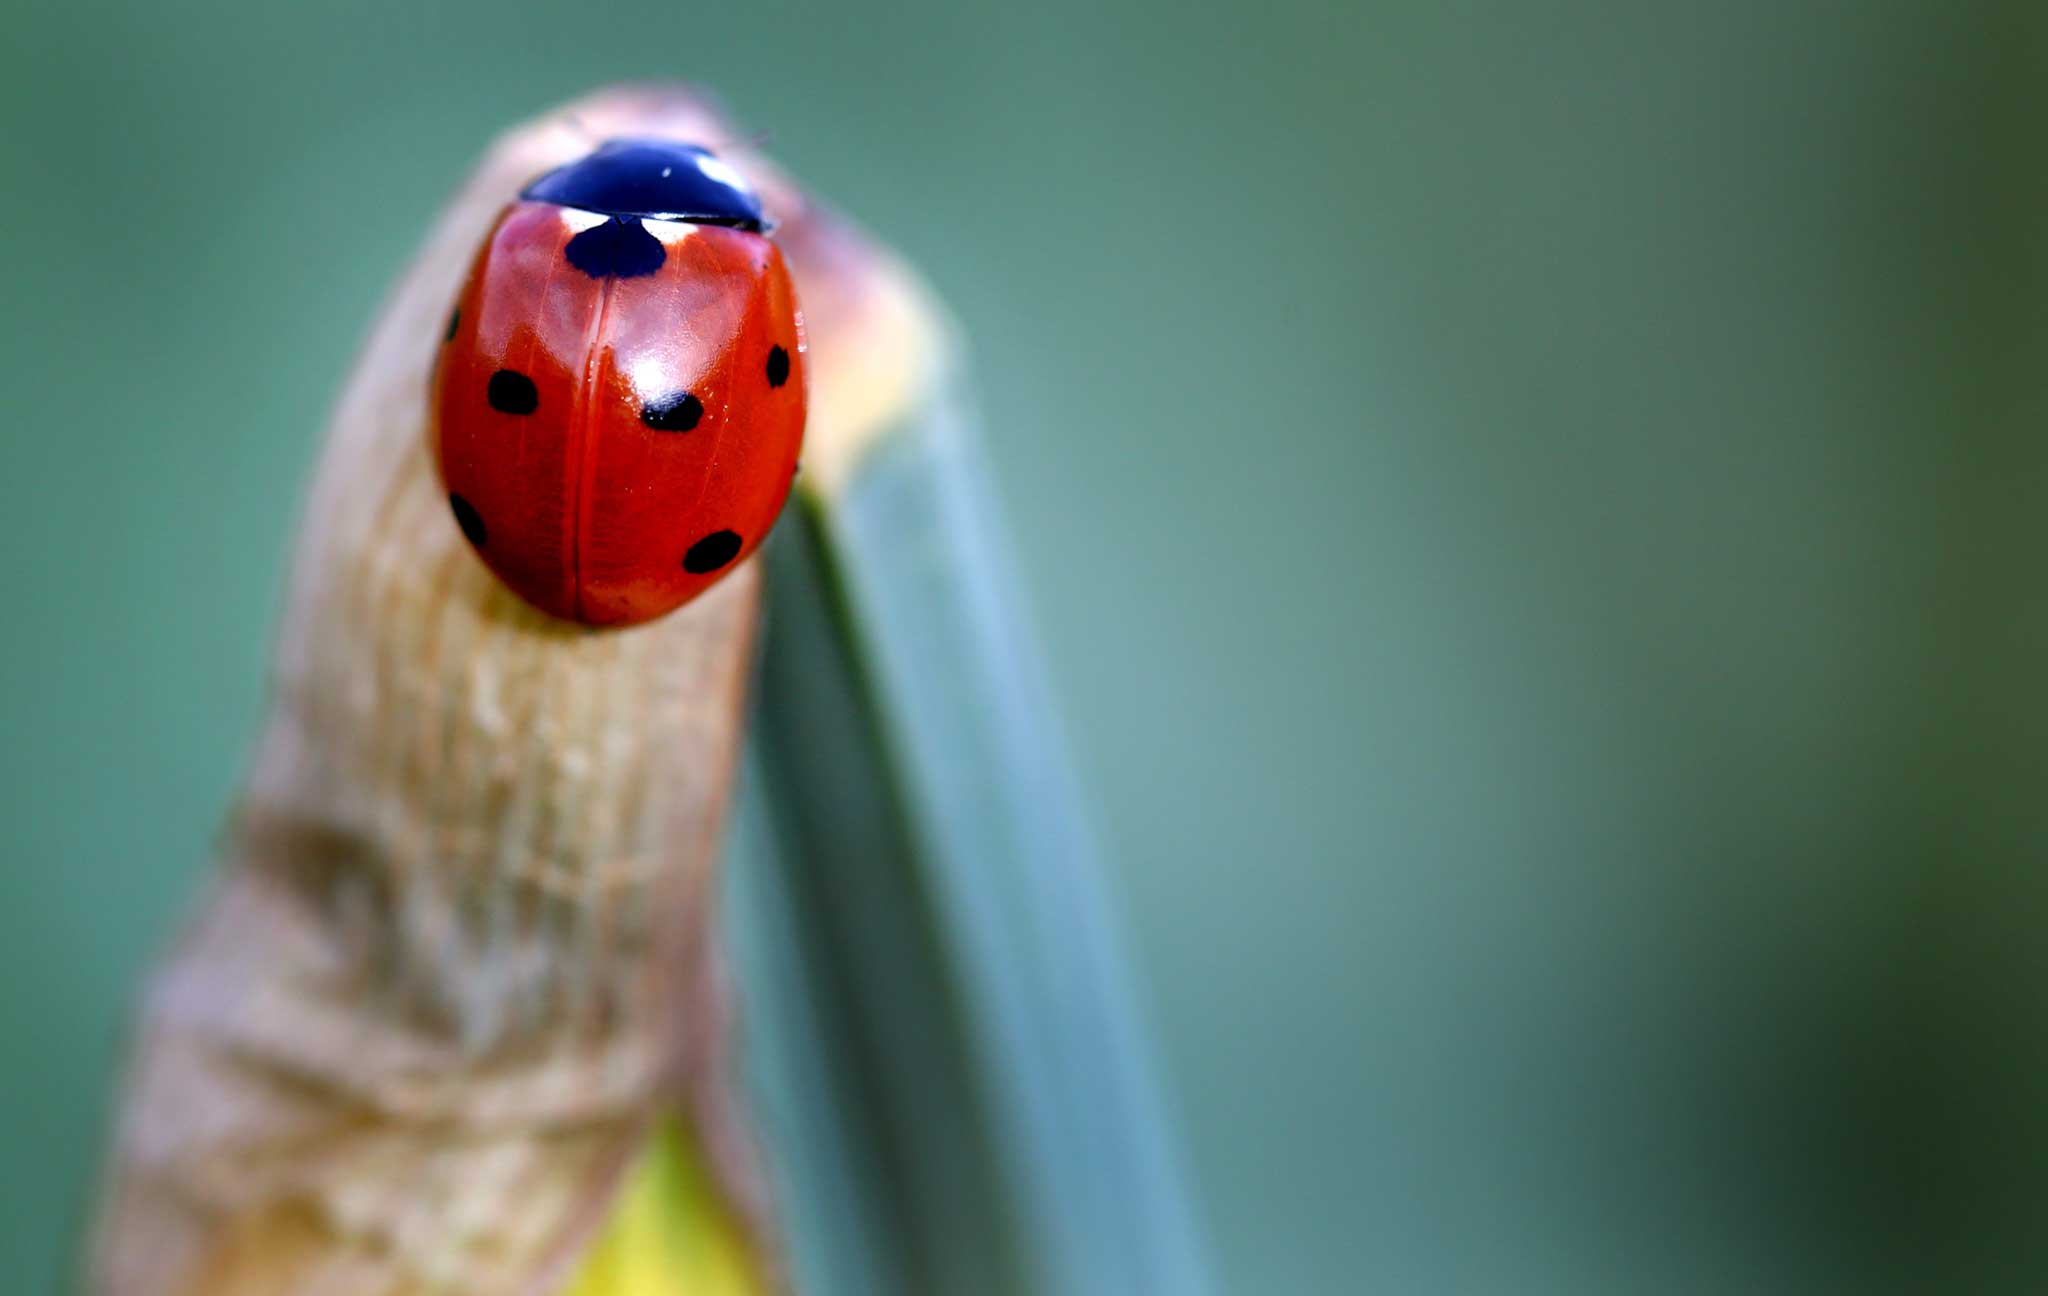 Don't forget your natural friends, such as ladybirds, which as adults and larvae eat prodigious numbers of aphids